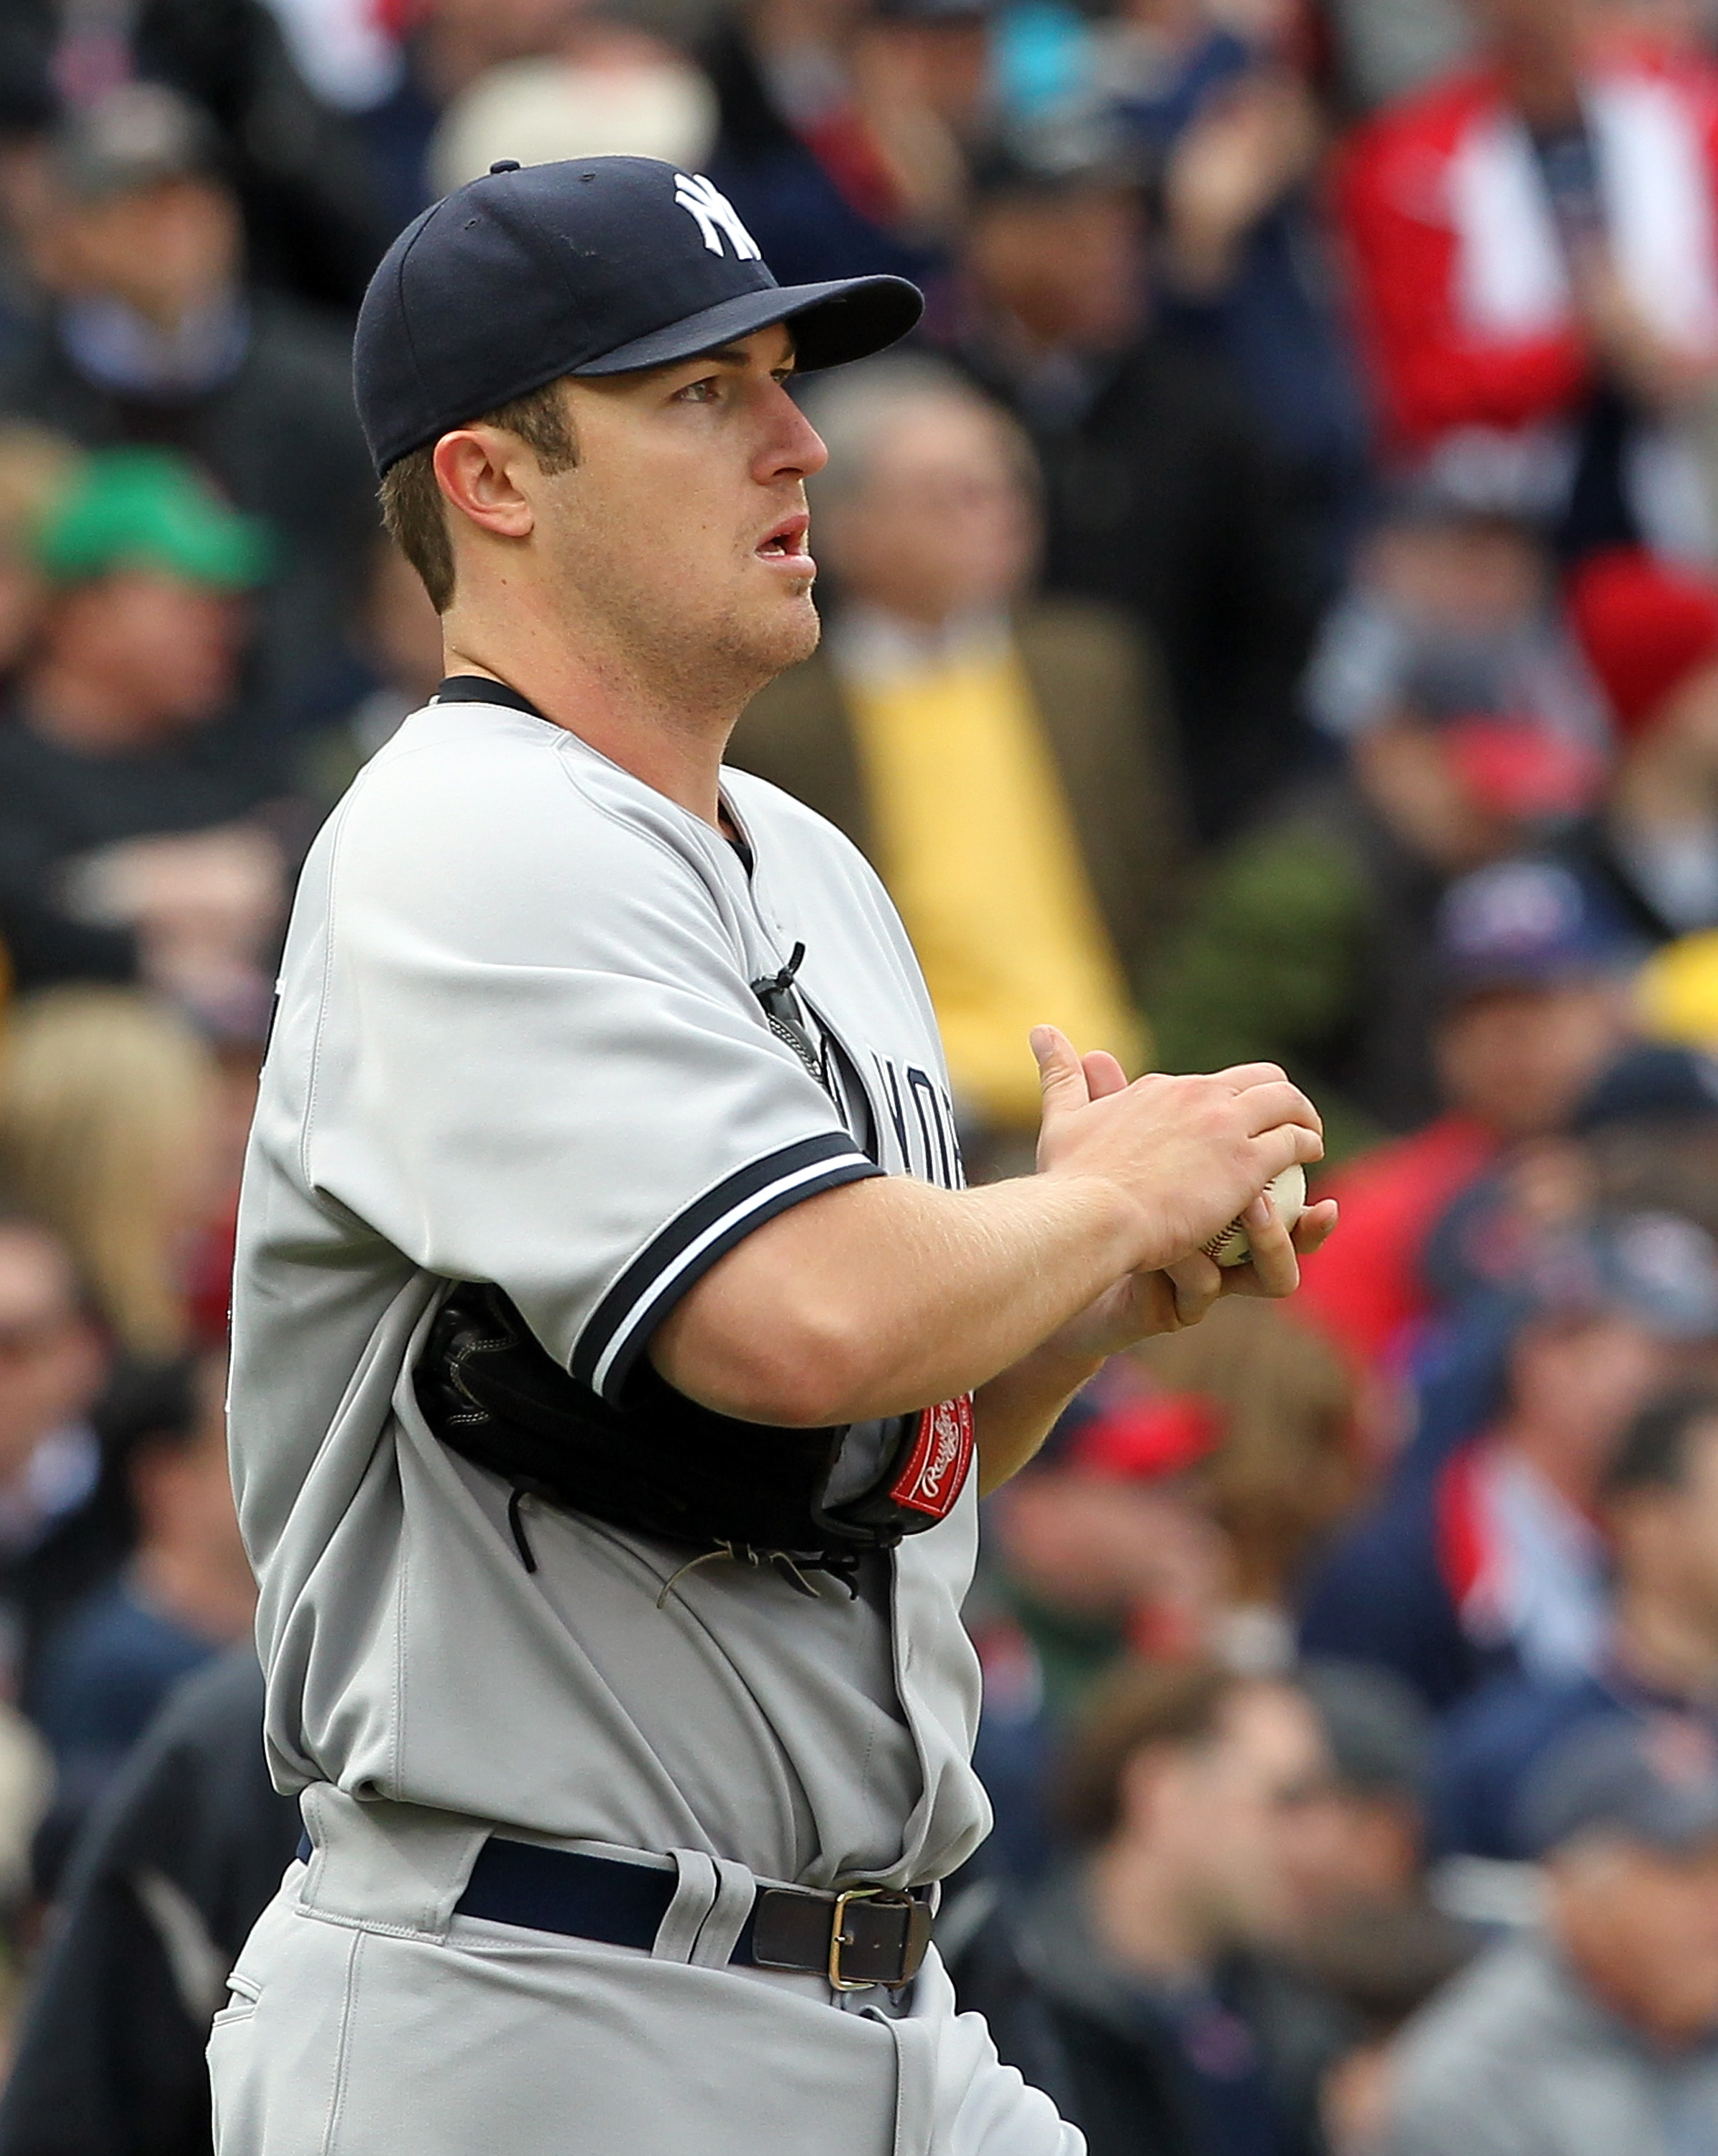 Dan Uggla committed one of the most embarrassing errors of the 2014 MLB  season